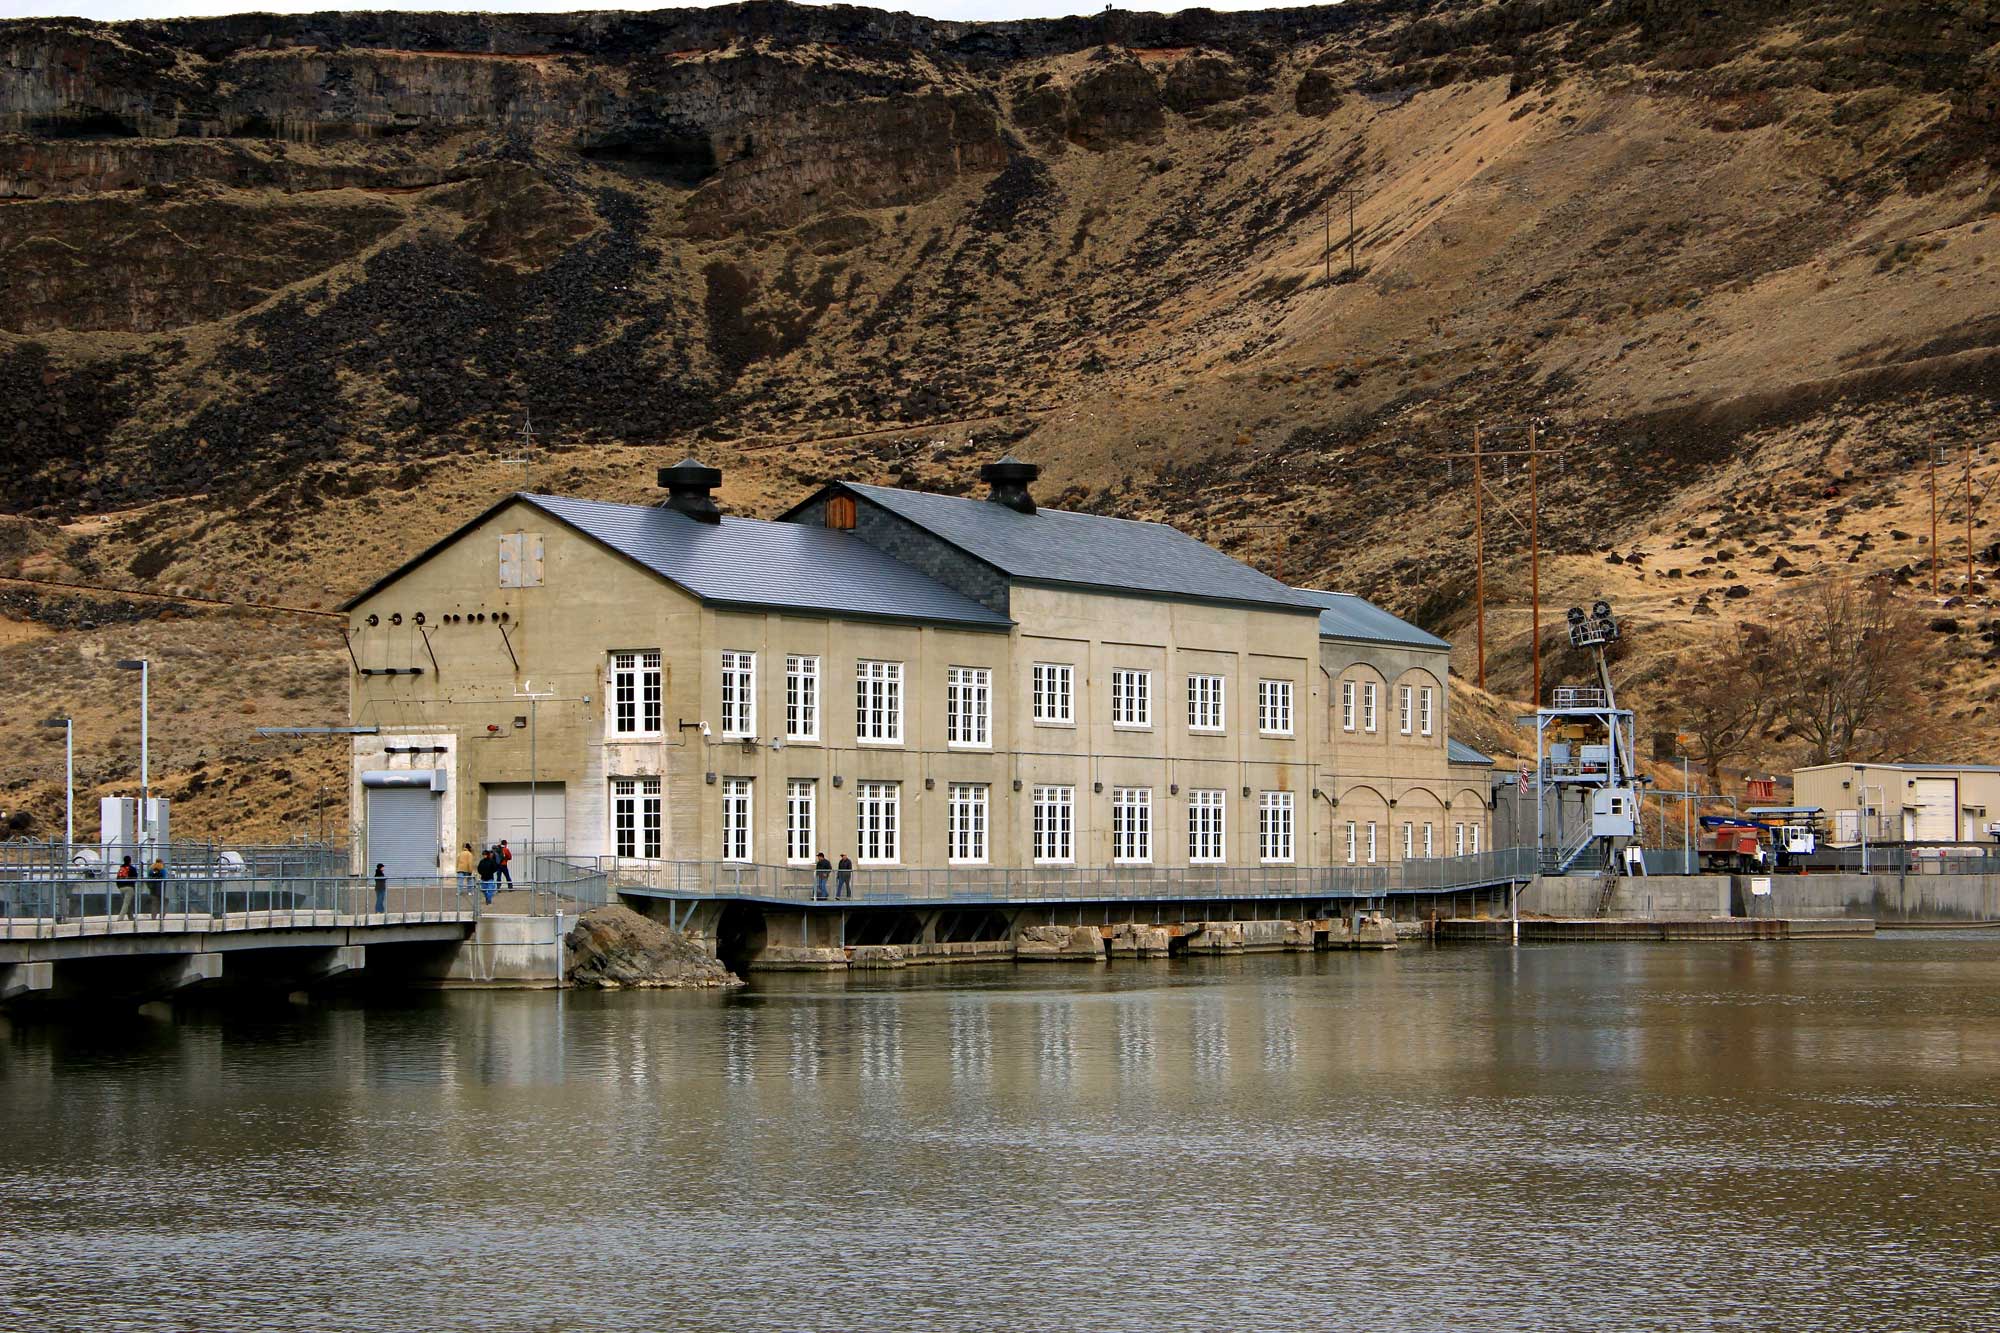 Photograph of Swan Falls dam on the Snake River in Idaho. The photo shows the dam as seen from the shore of the reservoir. A long building with beige walls and a black roof appears to be positioned on top fo the dam. A rocky slope rises in the background.